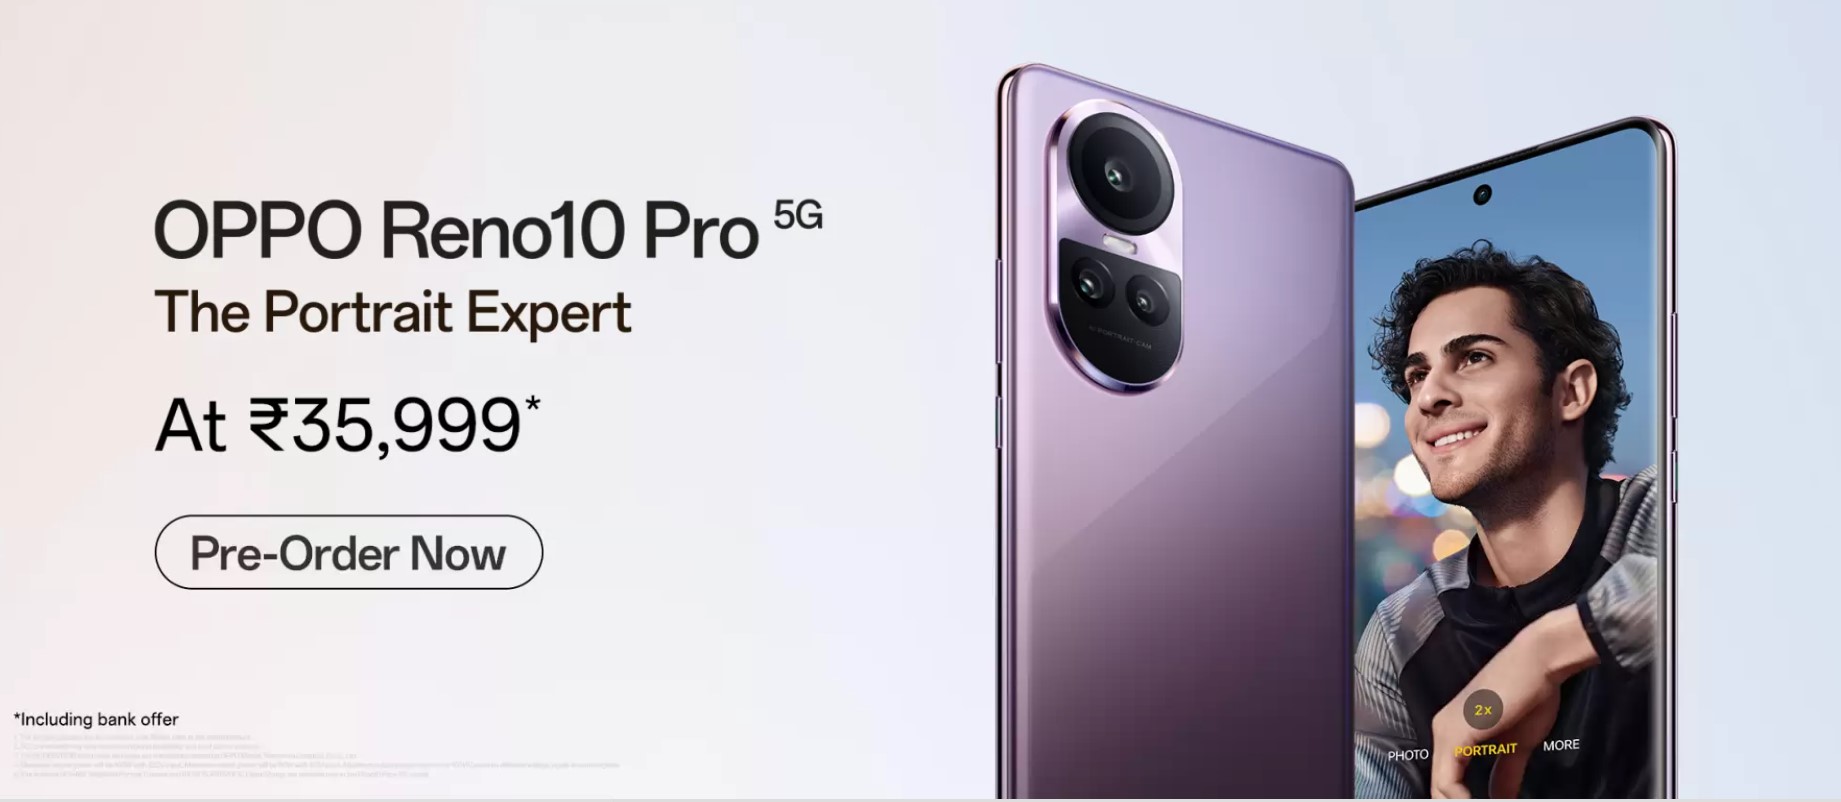 OPPO Reno 10 Series Launches in India Today - Live Stream Details, Launch Time, and Exciting Features Unveiled - Tech News - Updates - Before You Take 3